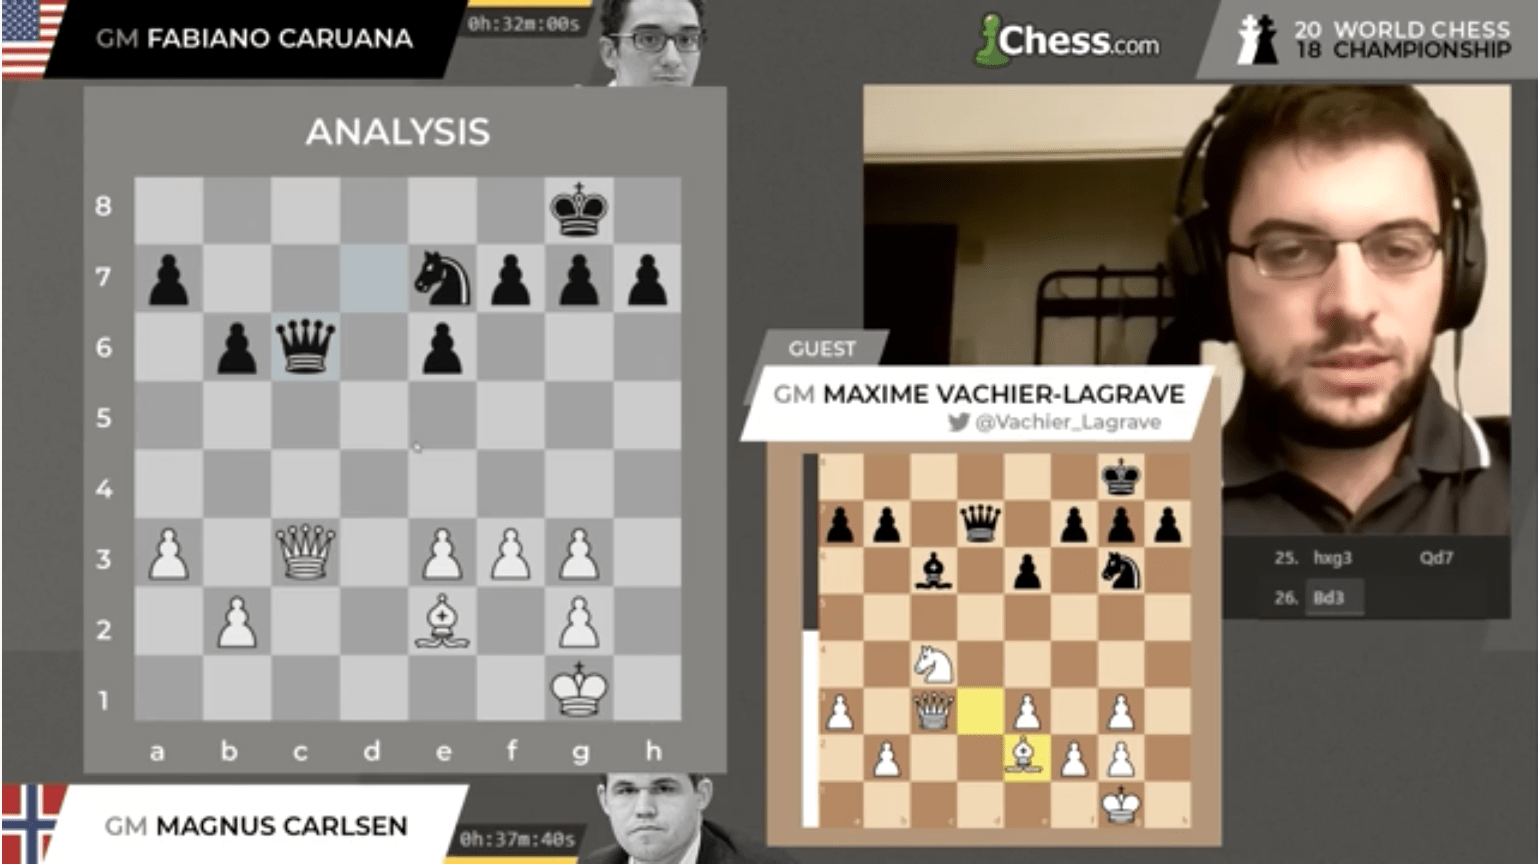 World Chess Championship Game 2: Carlsen 'Grovels' To Draw After Caruana's  Opening Surprise 